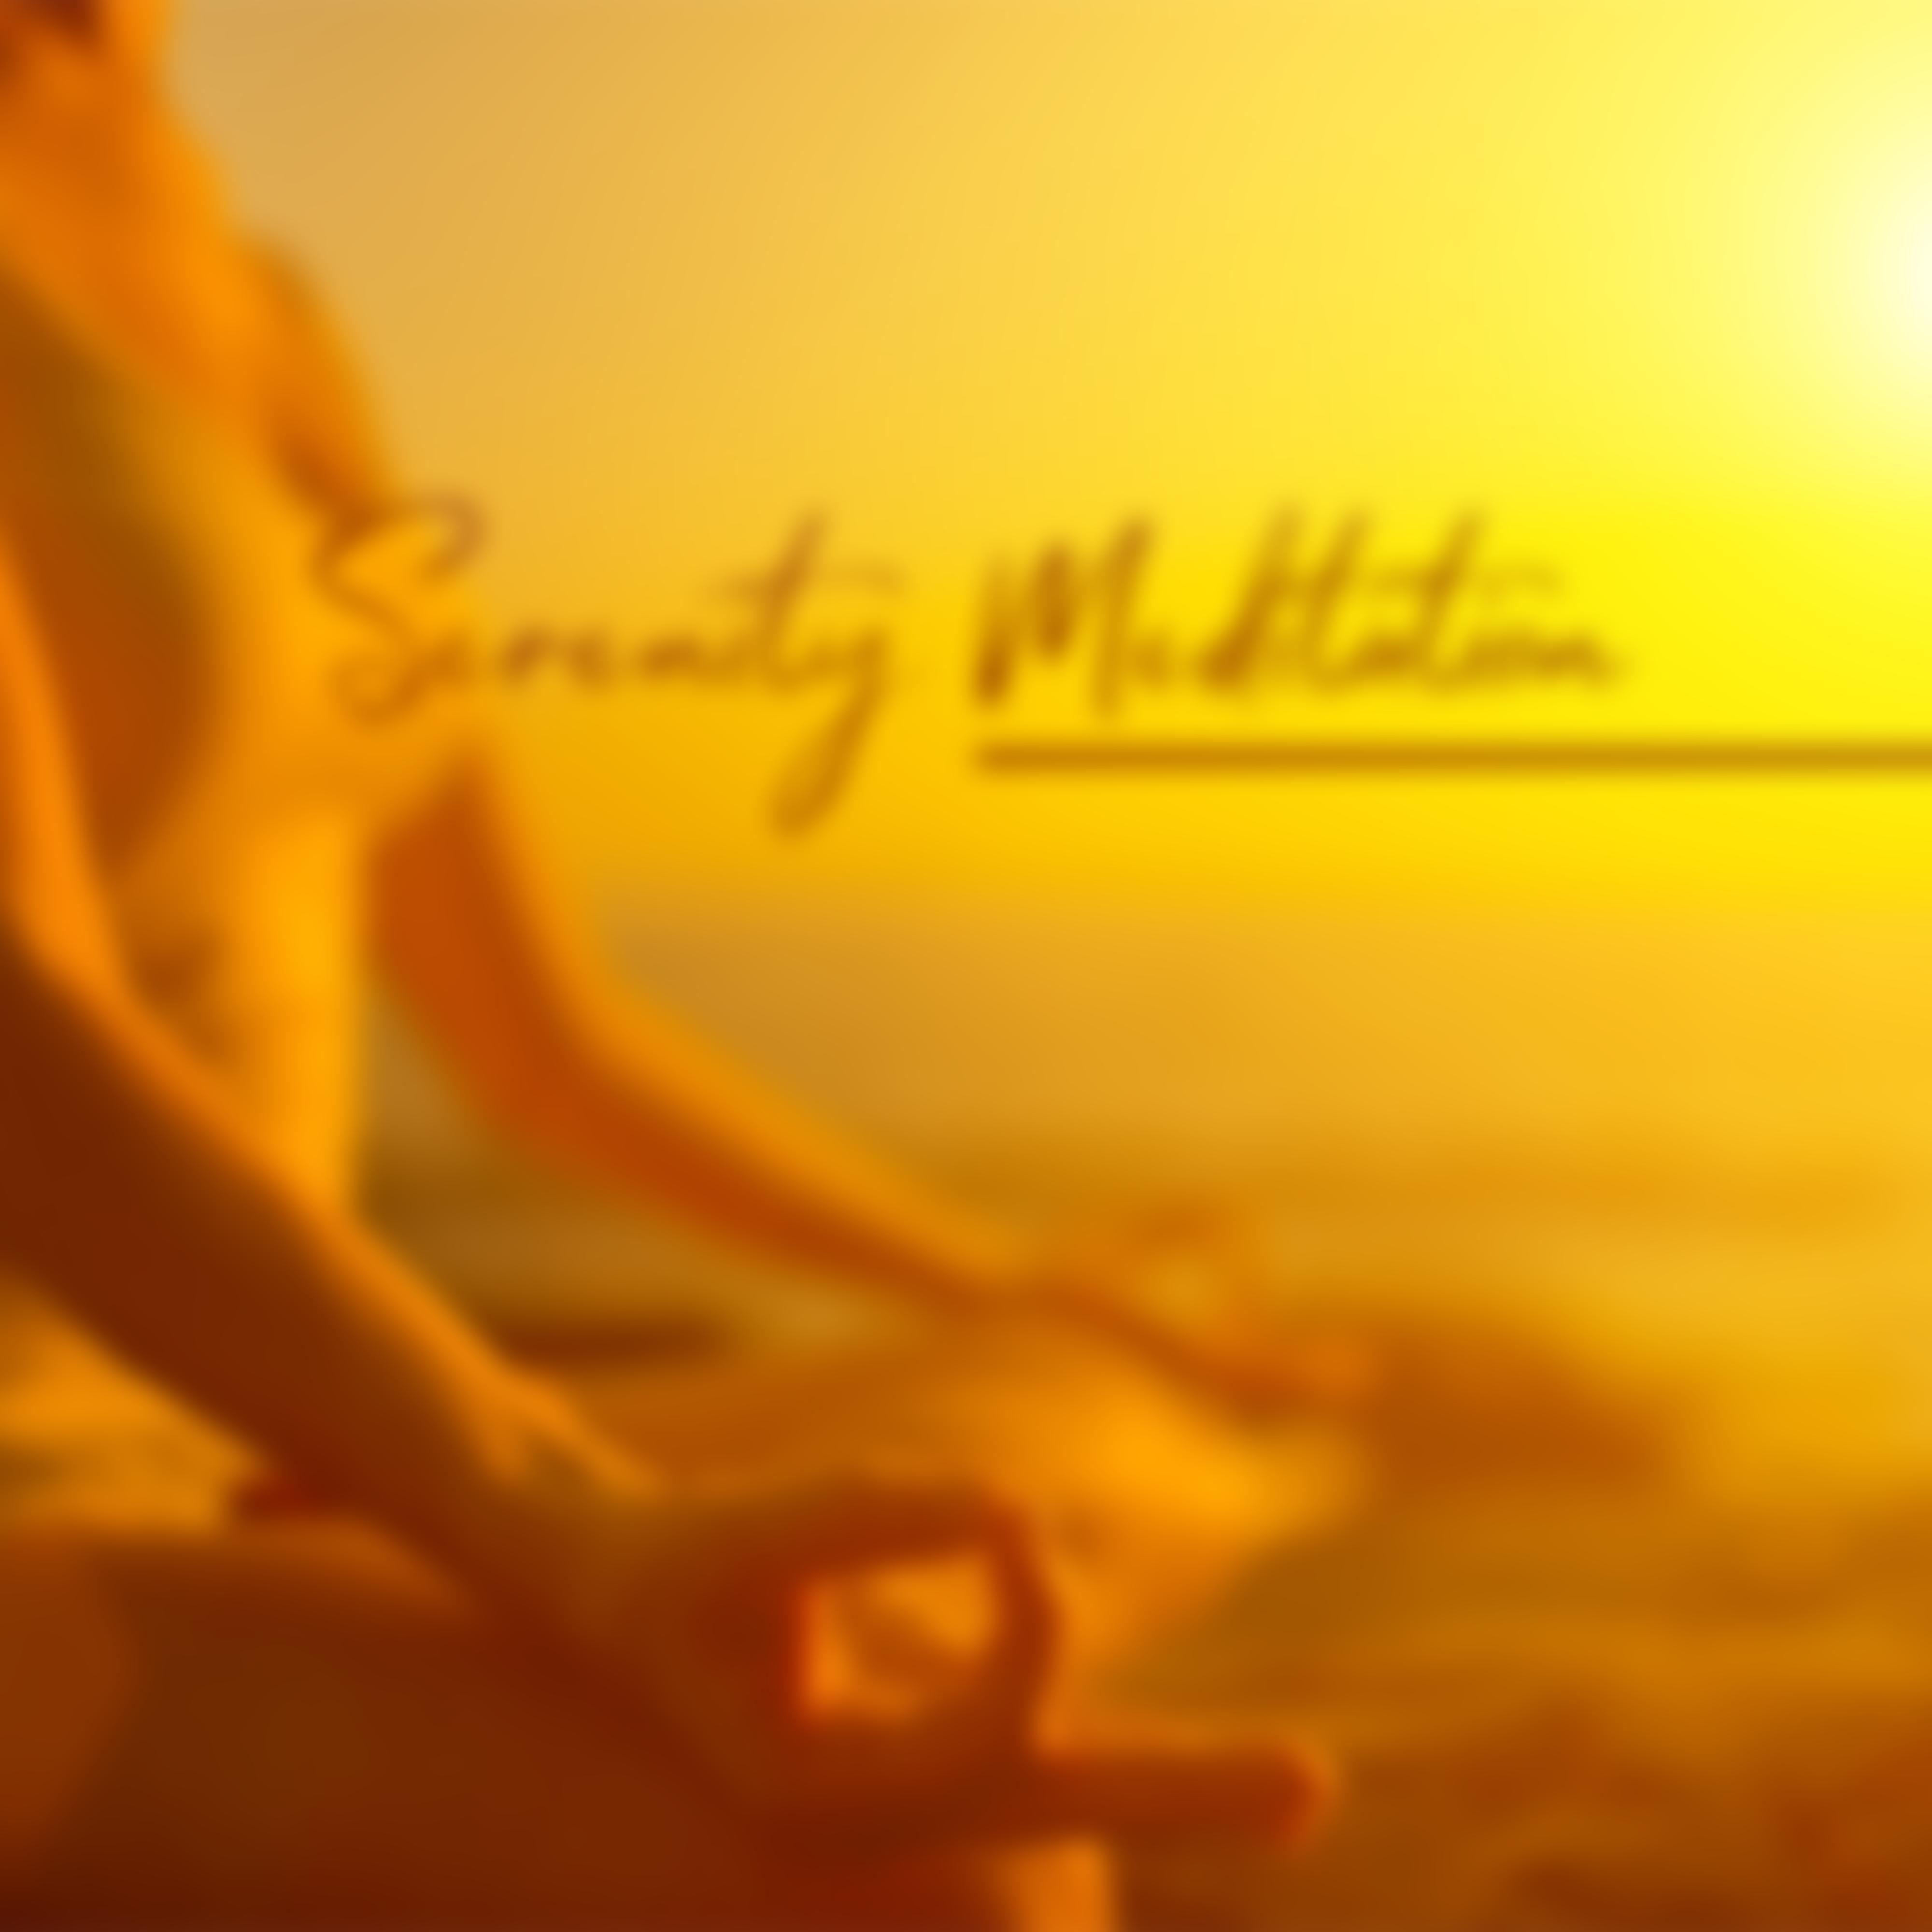 Serenity Meditation: Music Background to Achieve Inner Harmony, Peace and Balance of Body and Mind